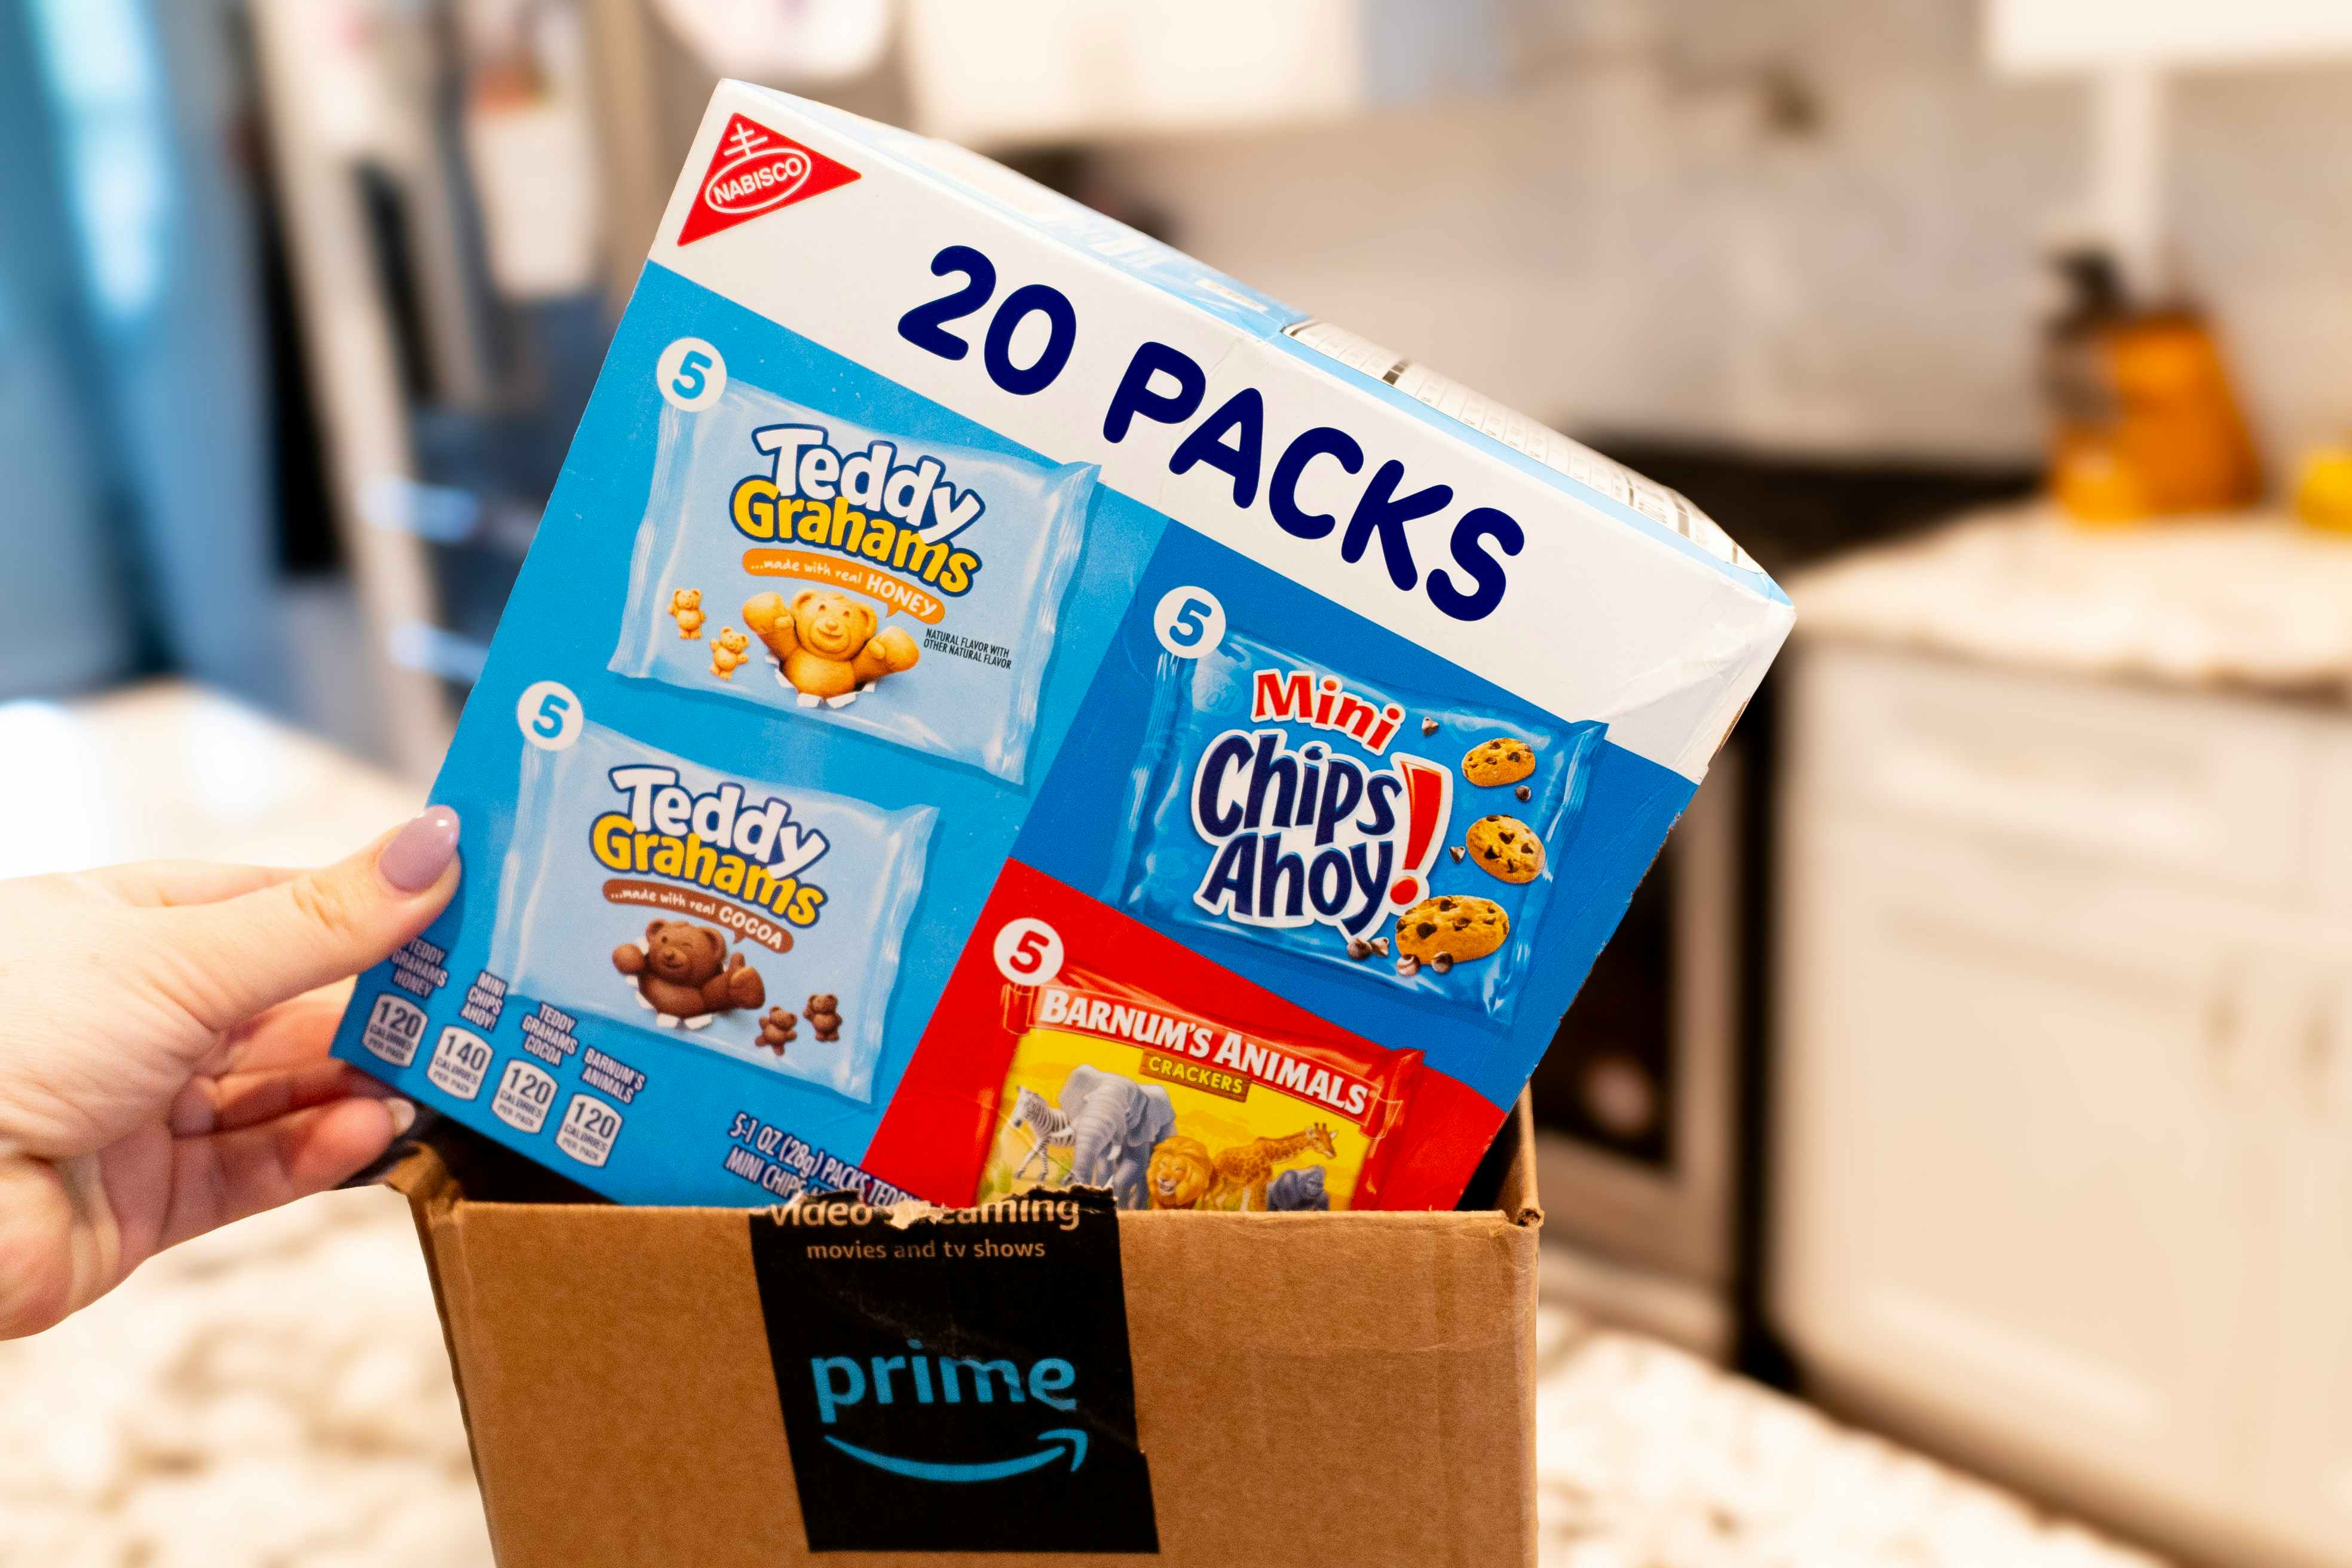 30% Off Nabisco Snack Packs on Amazon — Get Bulk Boxes for as Low as $4.85